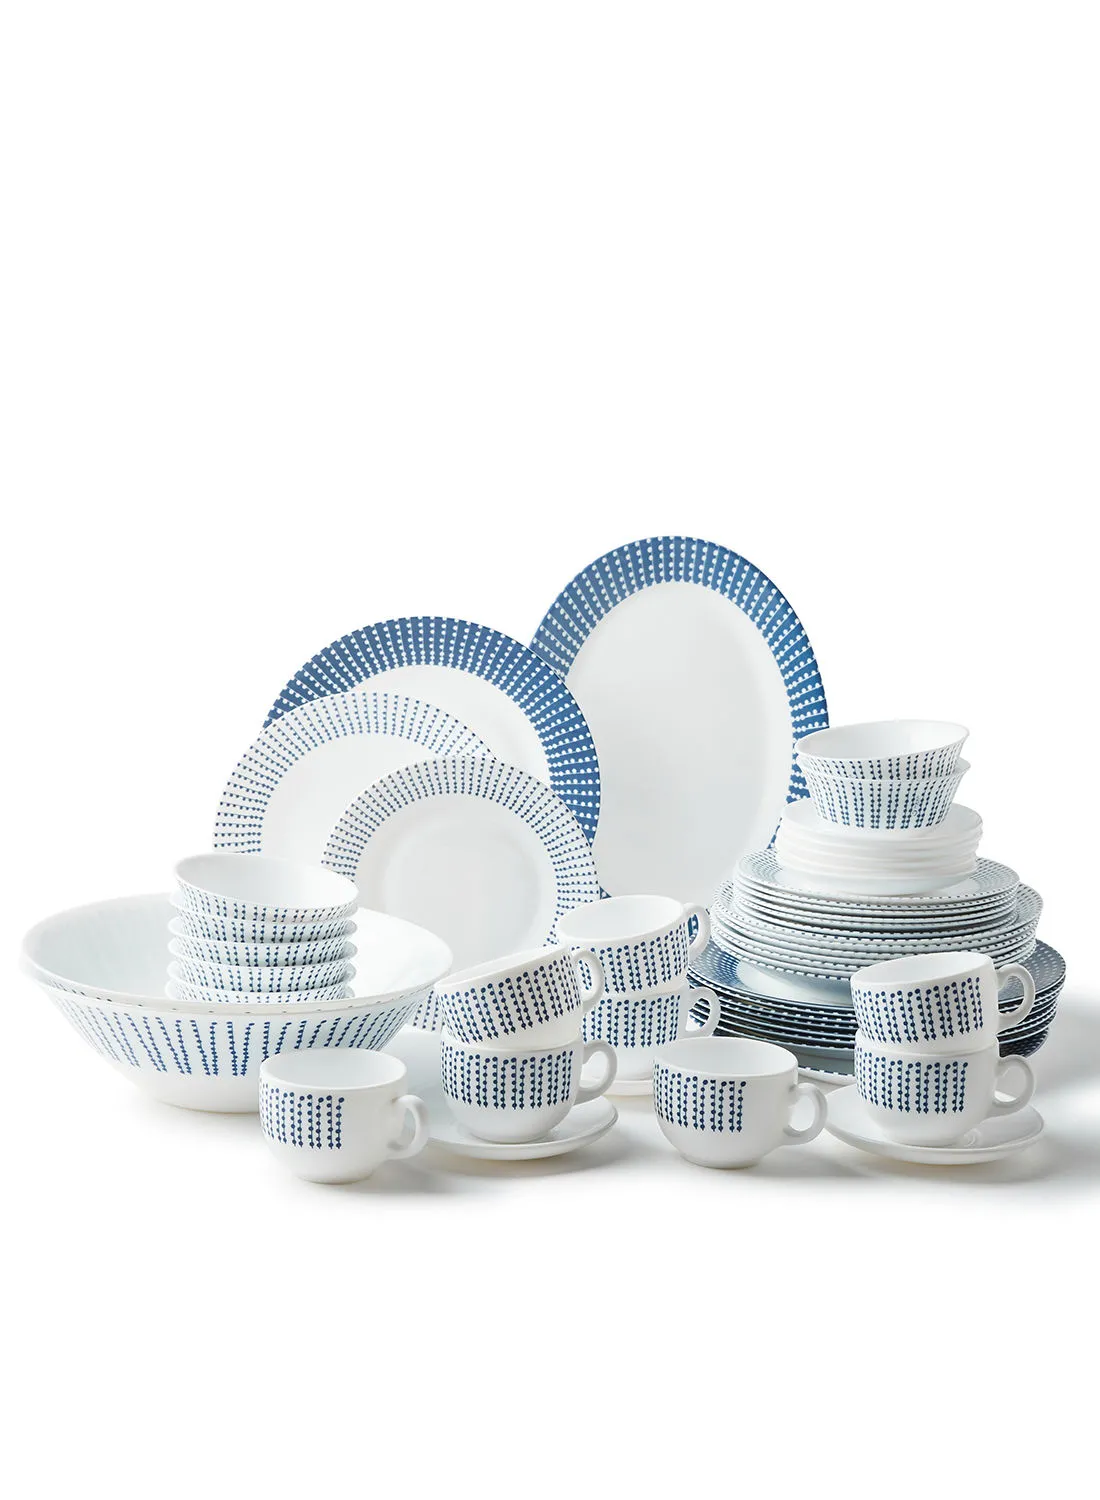 noon east 52 Piece Opalware Dinner Set For Everyday Use - Light Weight Dishes, Plates - Dinner Plate, Side Plate, Bowl, Cups, Serving Dish And Bowl - Serves 8 - Printed Design Livia